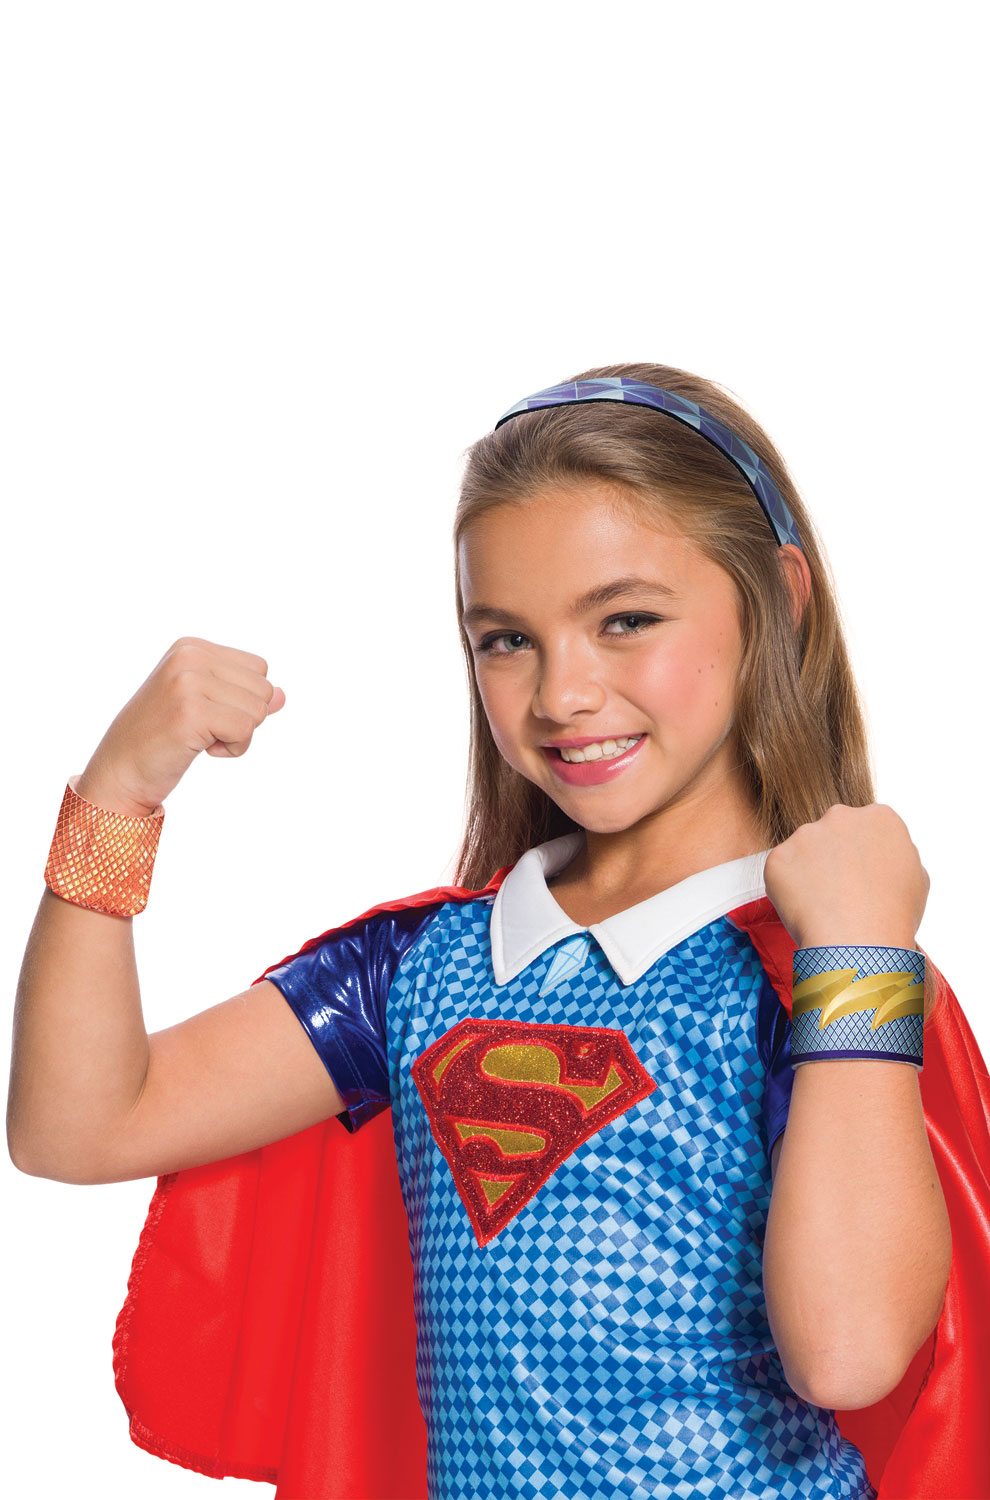 If you're putting together a DIY costume for Supergirl, you need her h...